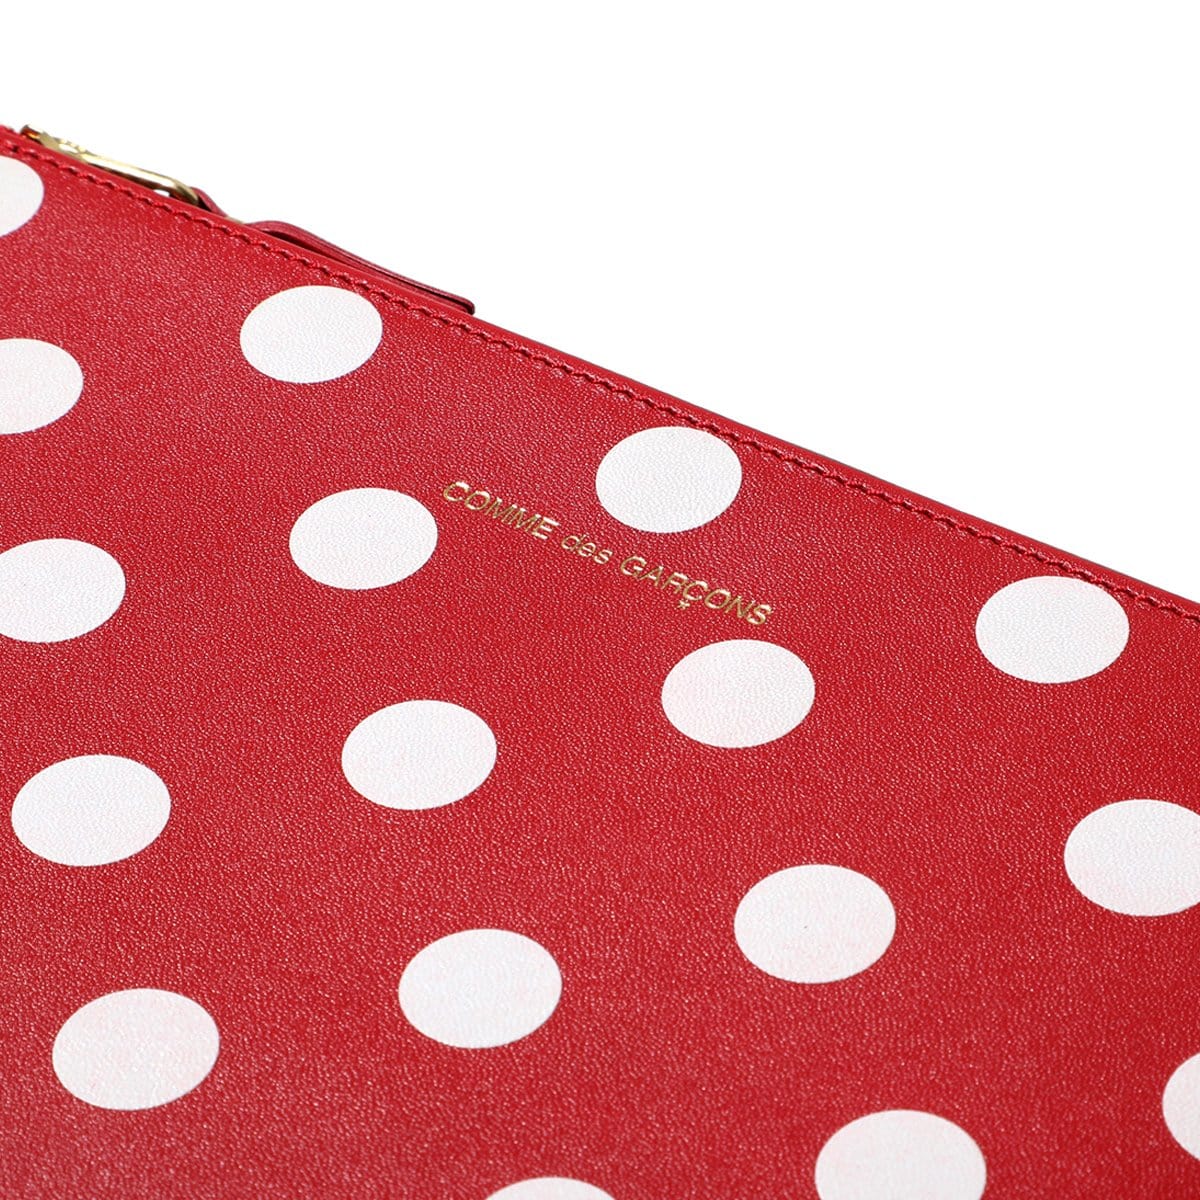 Comme Des Garçons Wallet Bags & Accessories RED / O/S DOTS PRINTED LEATHER LINE